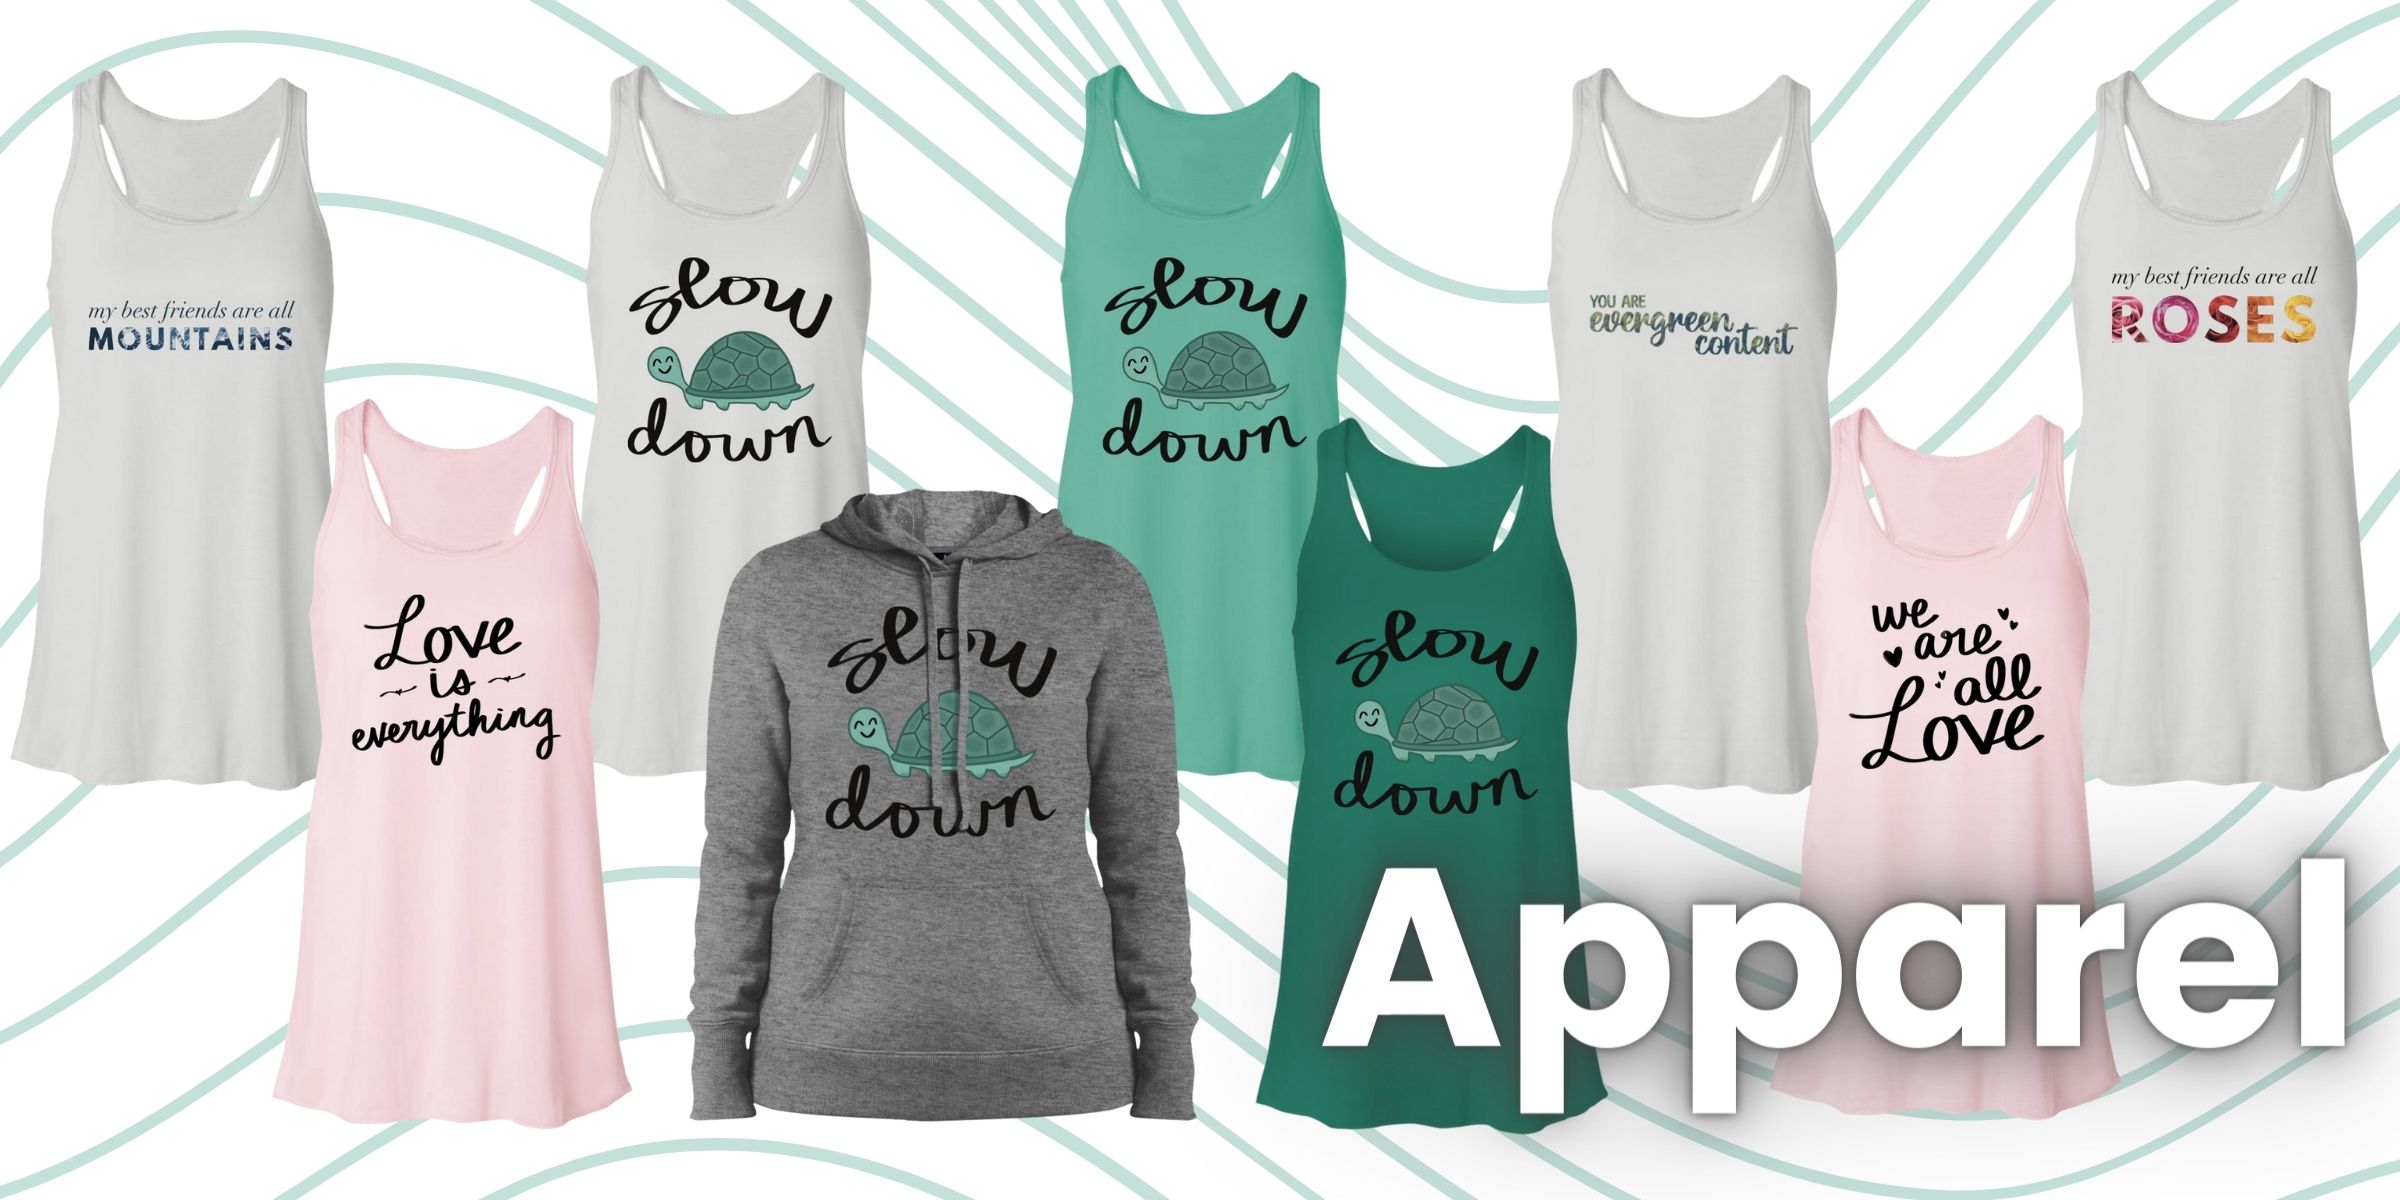 Inspirational and Nature-Inspired Apparel by Strong with Purpose